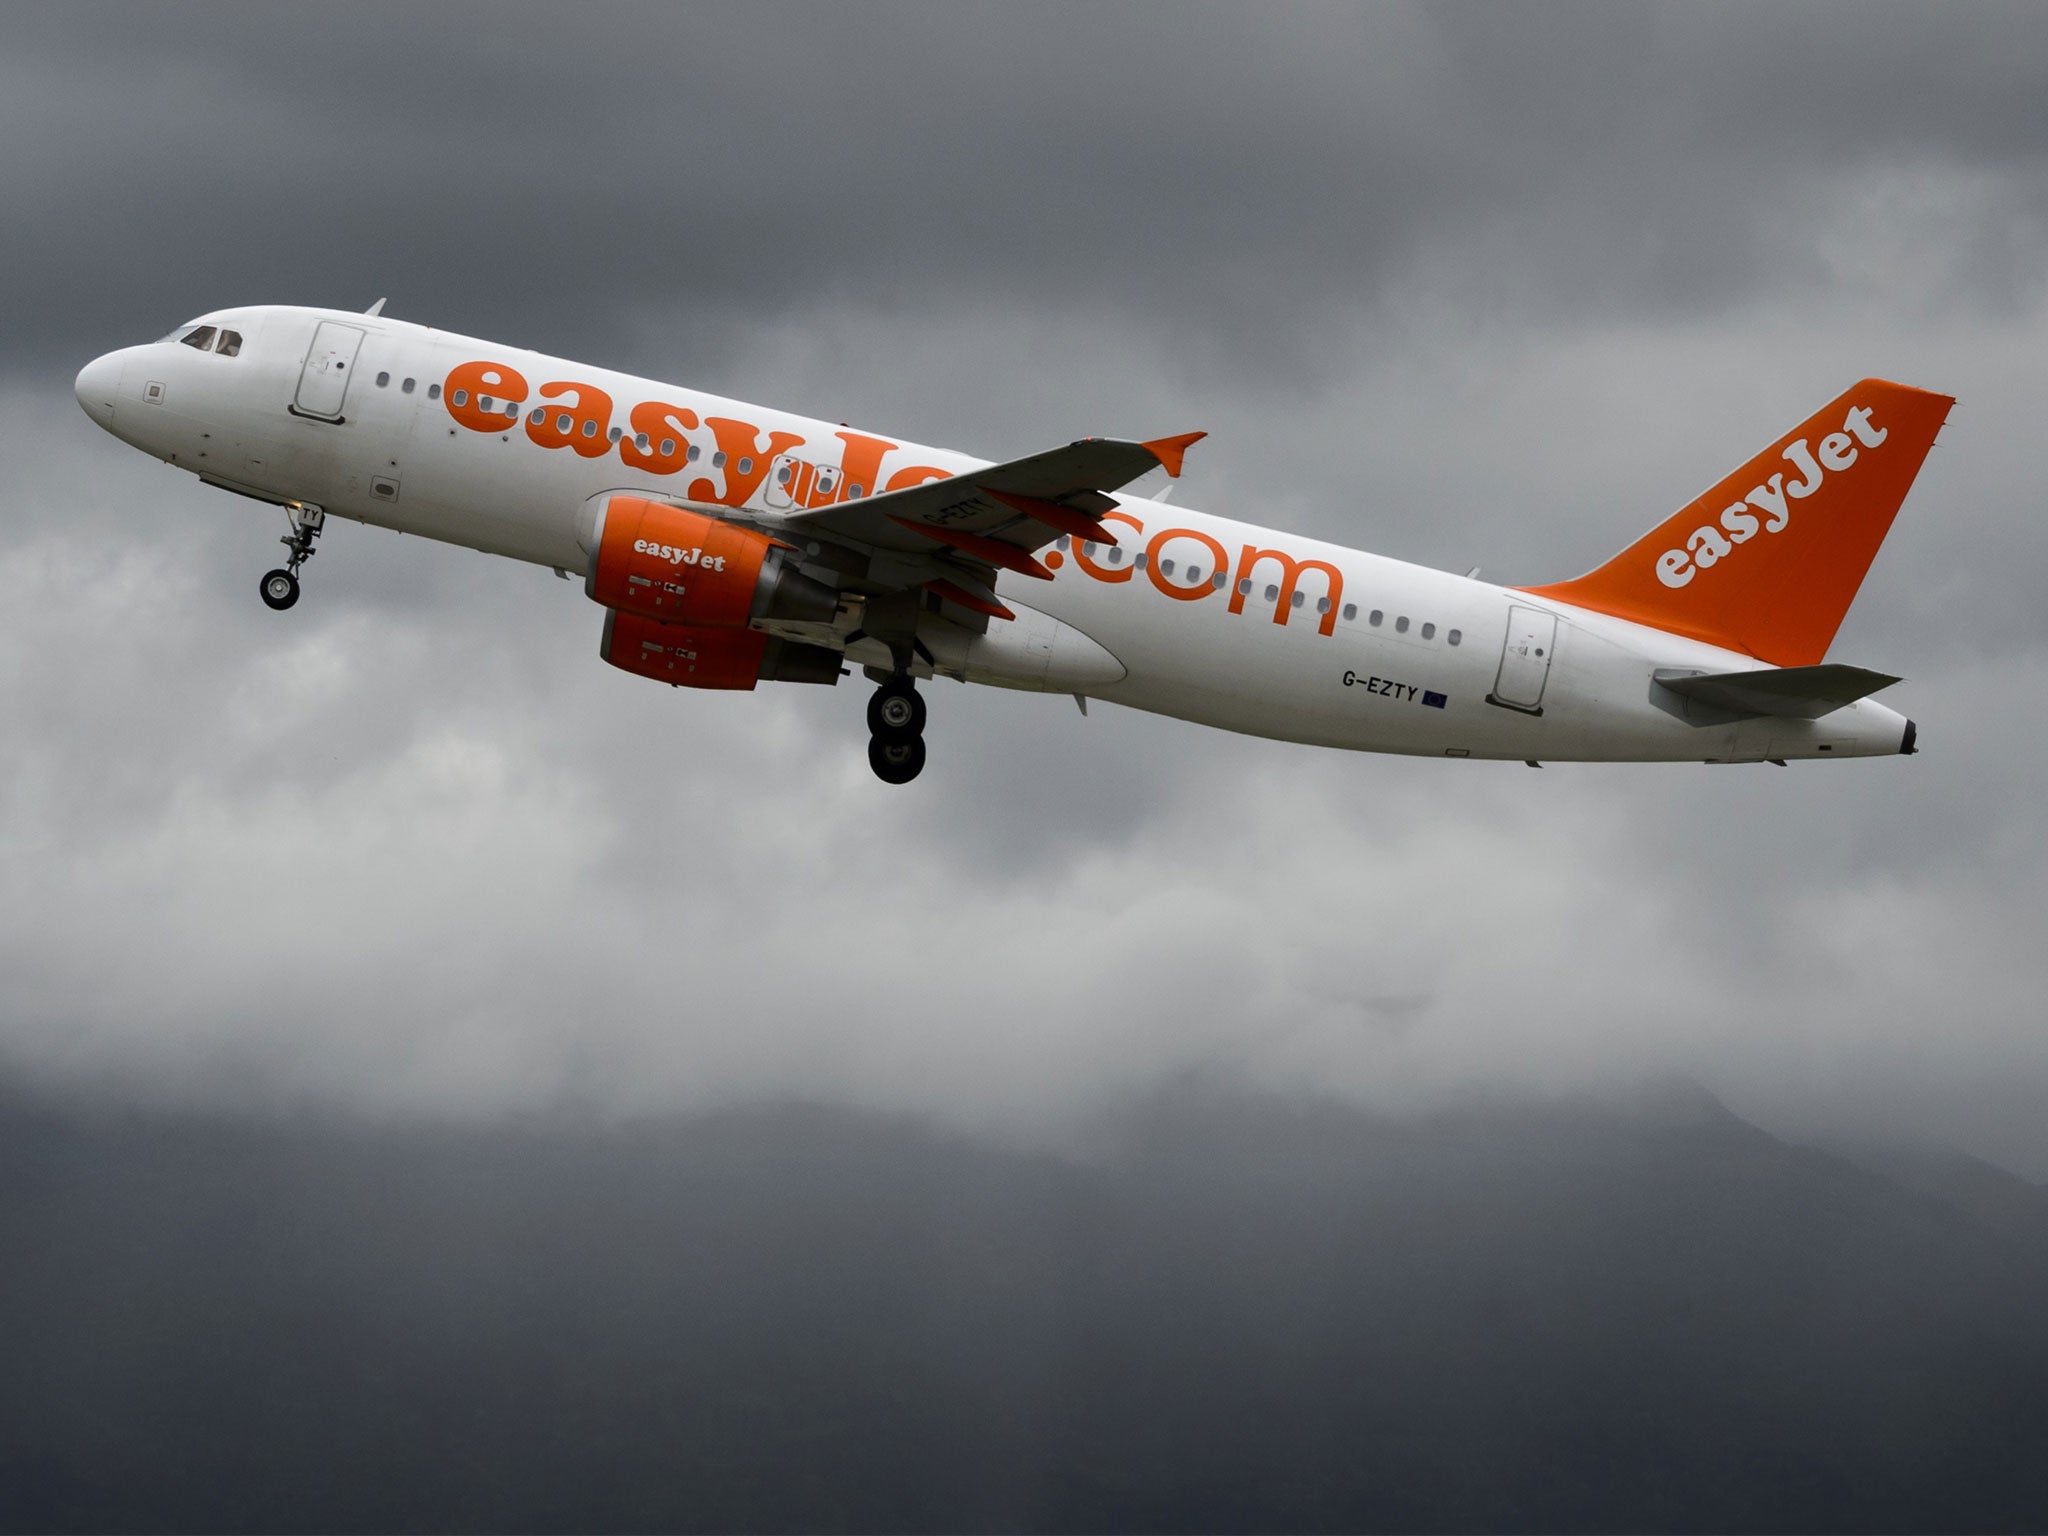 Besides the 151 passengers on board the easyJet plane, seven inbound flights were diverted to other airports, 20 departures were seriously delayed and two flights were cancelled altogether